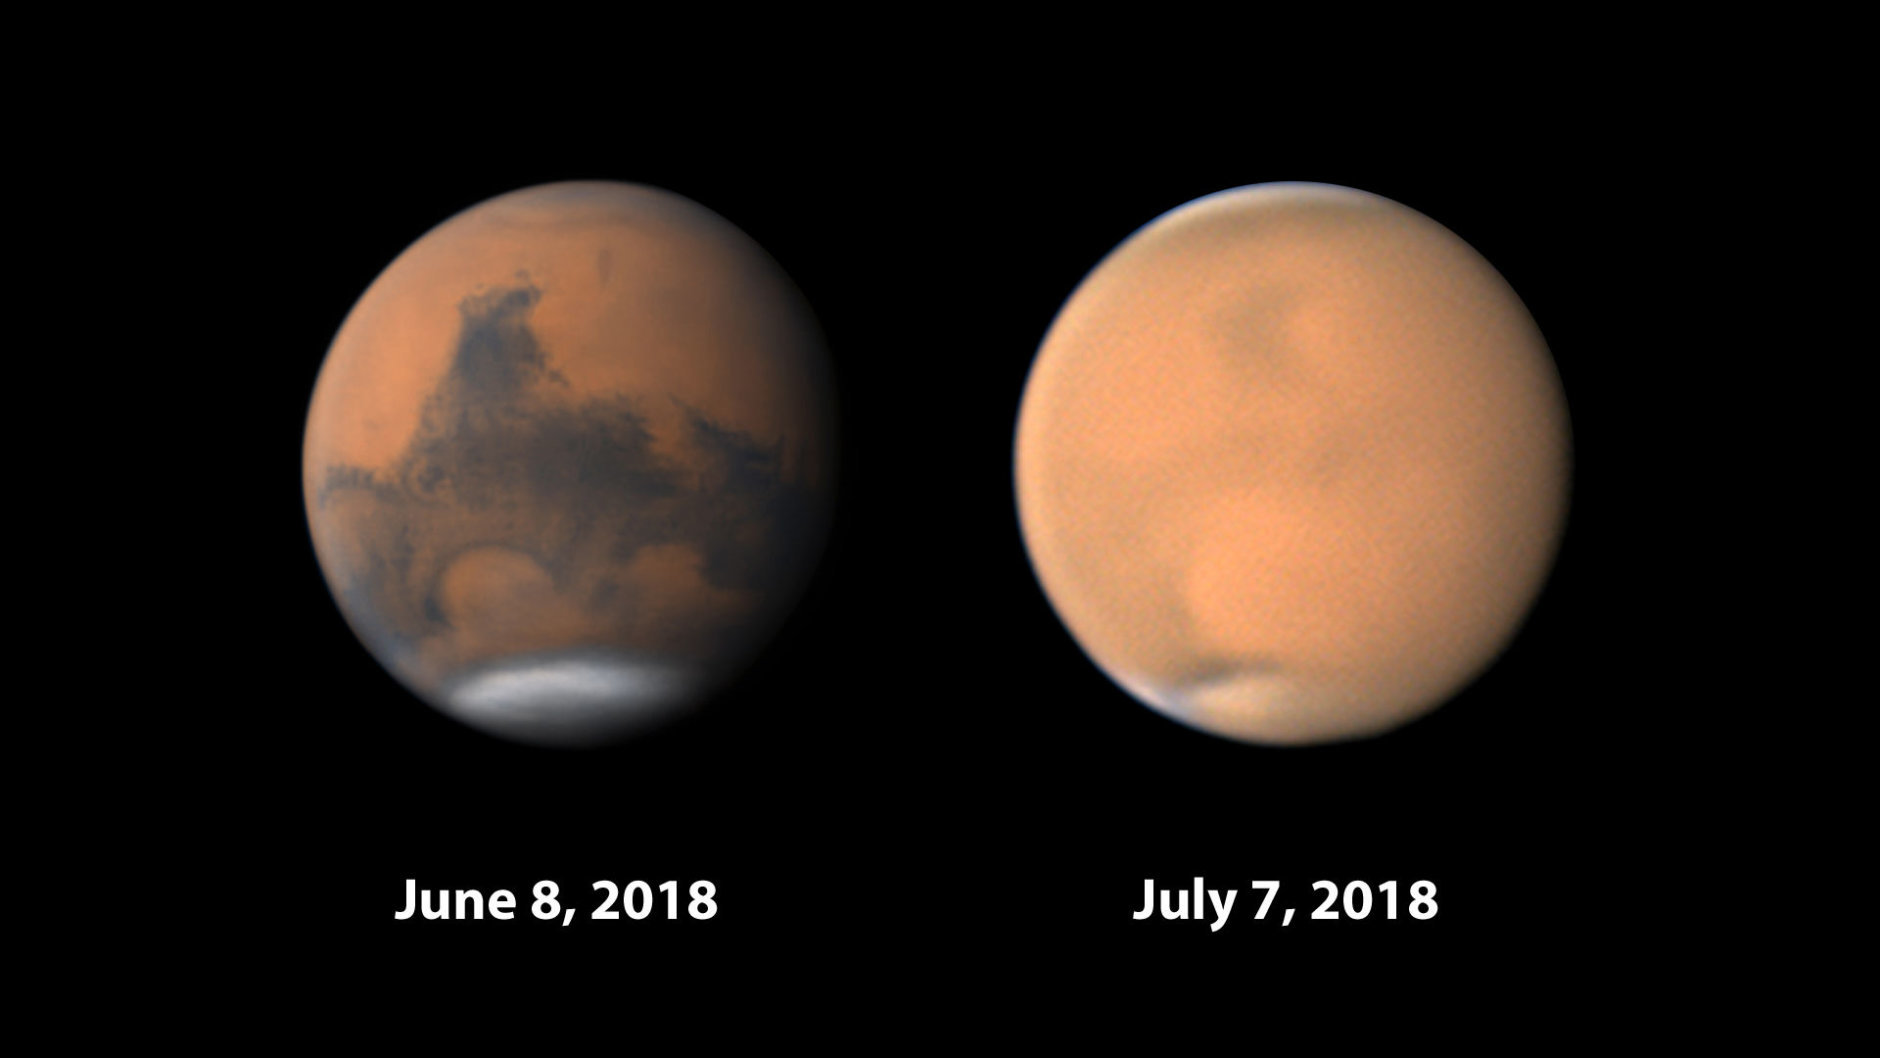 From SkyandTelescope.com: "A dust storm first noticed on Mars in late May has since engulfed the entire planets, as underscored by these images of the same hemisphere taken one month apart by amateur astronomers Damian Peach (left) and Christophe Pellier (right)." (Sky & Telescope)